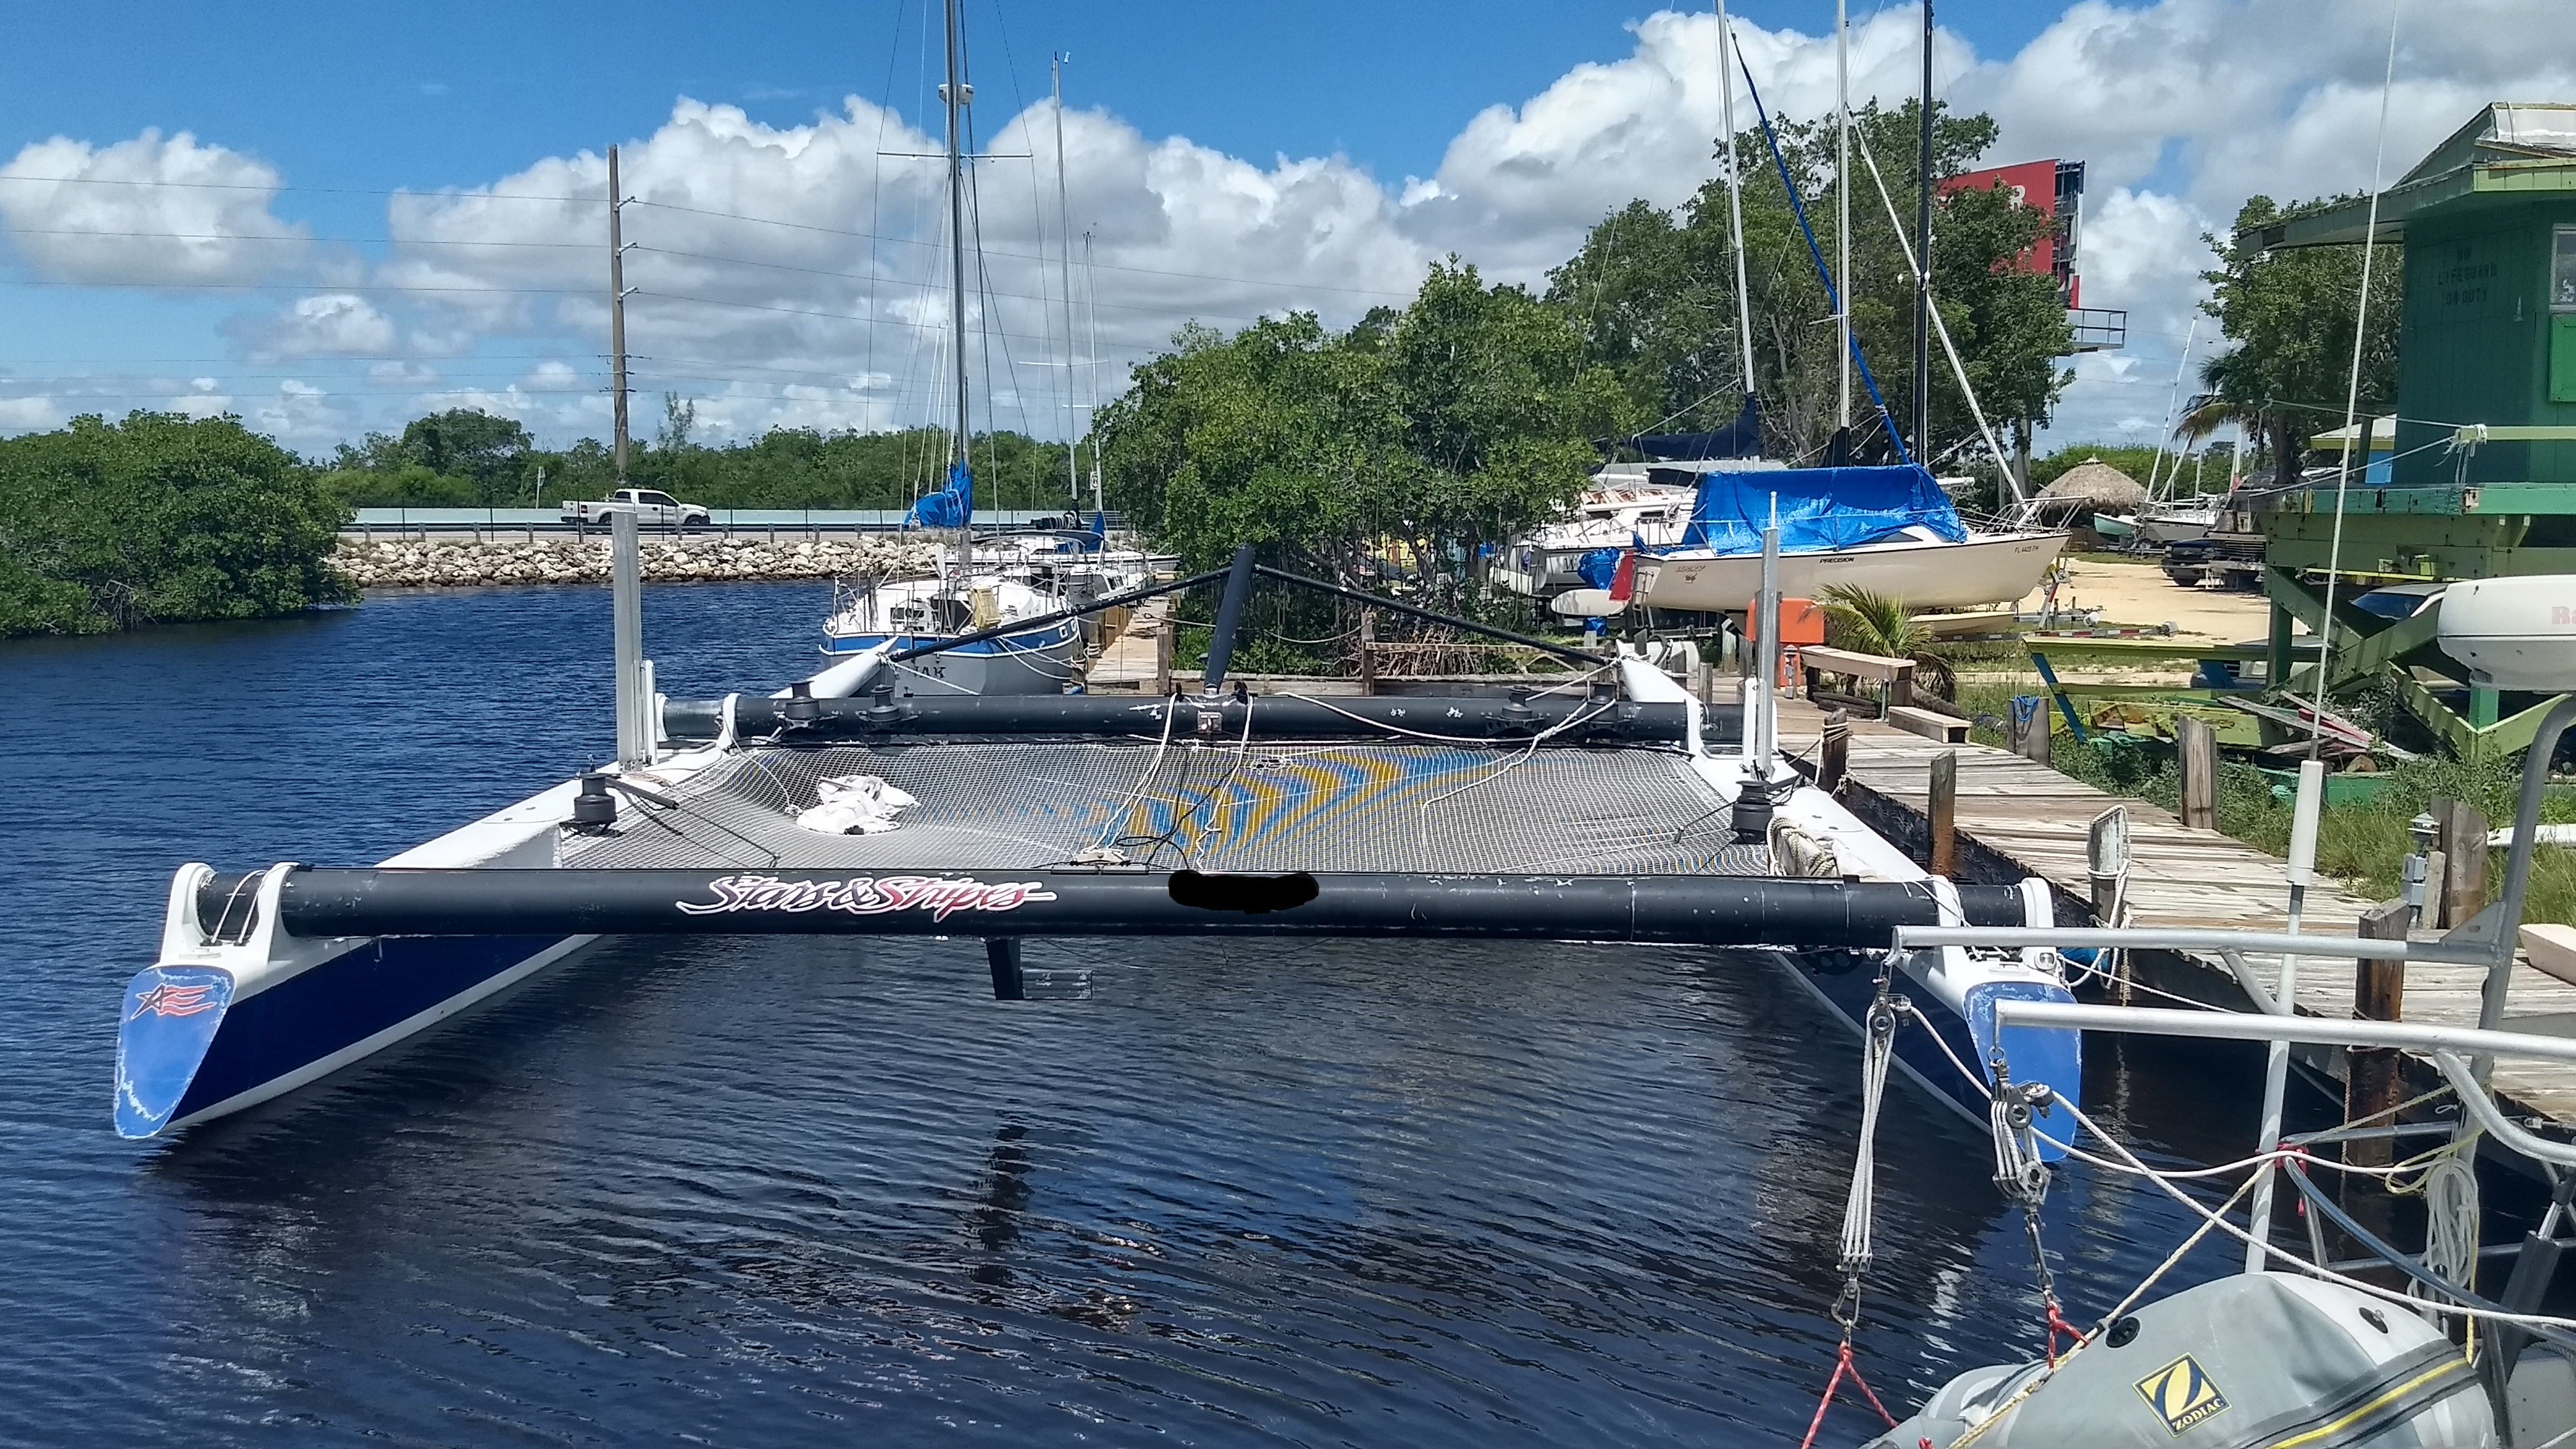 Stars & Stripes 88 Americas Cup Catamaran Fors Sale by Aeroyacht in Florida